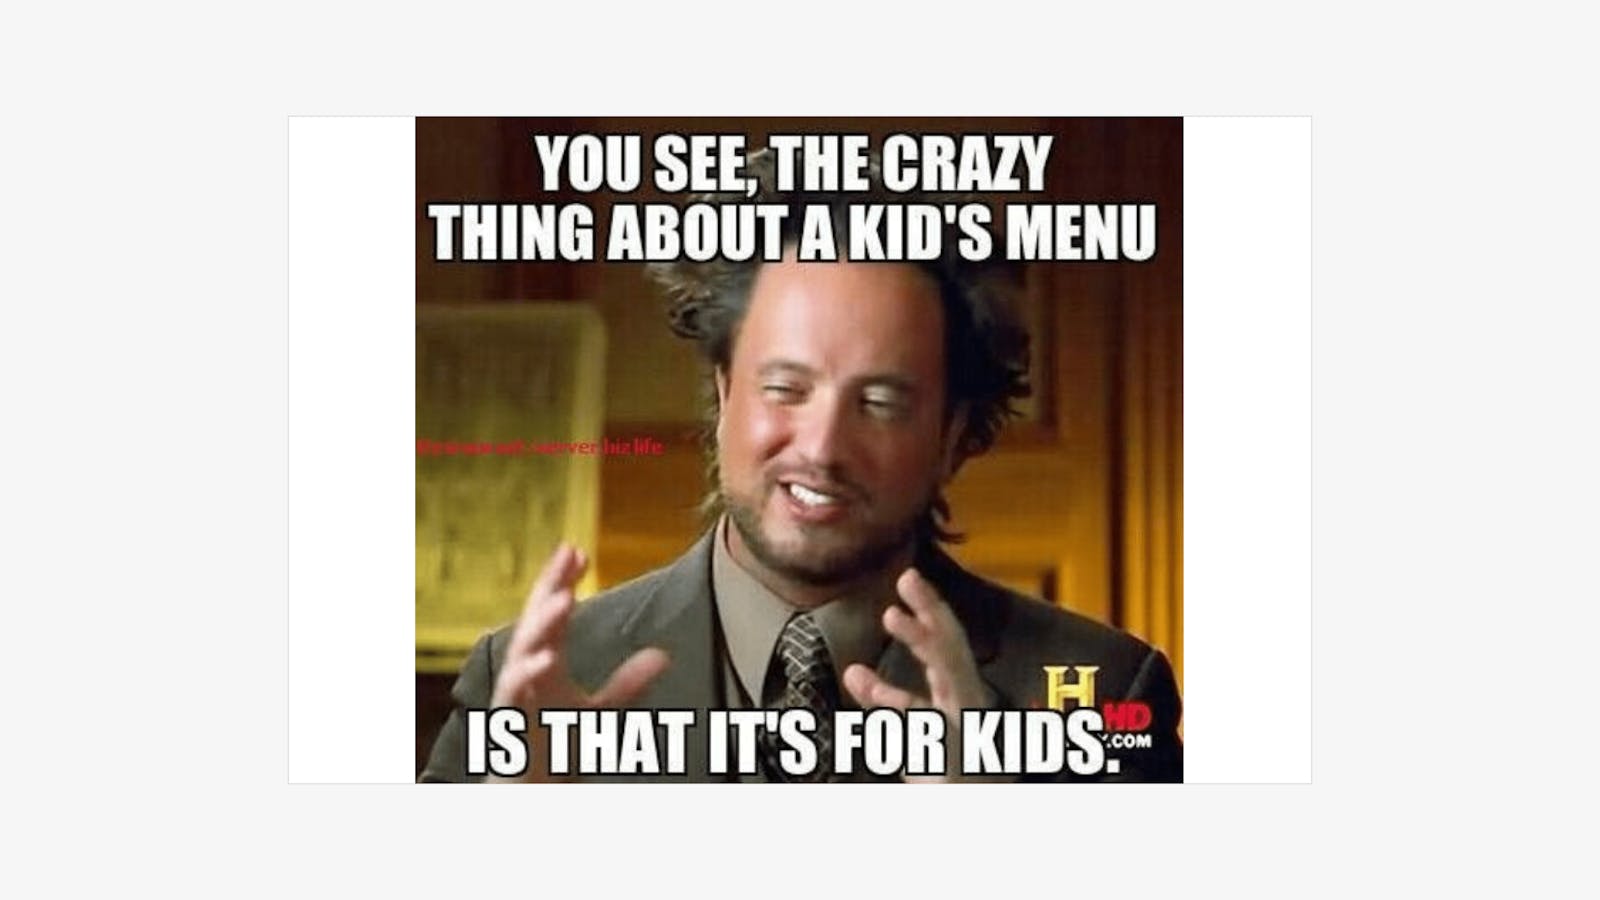 Meme for restaurants about customers who order from kids' menus. 